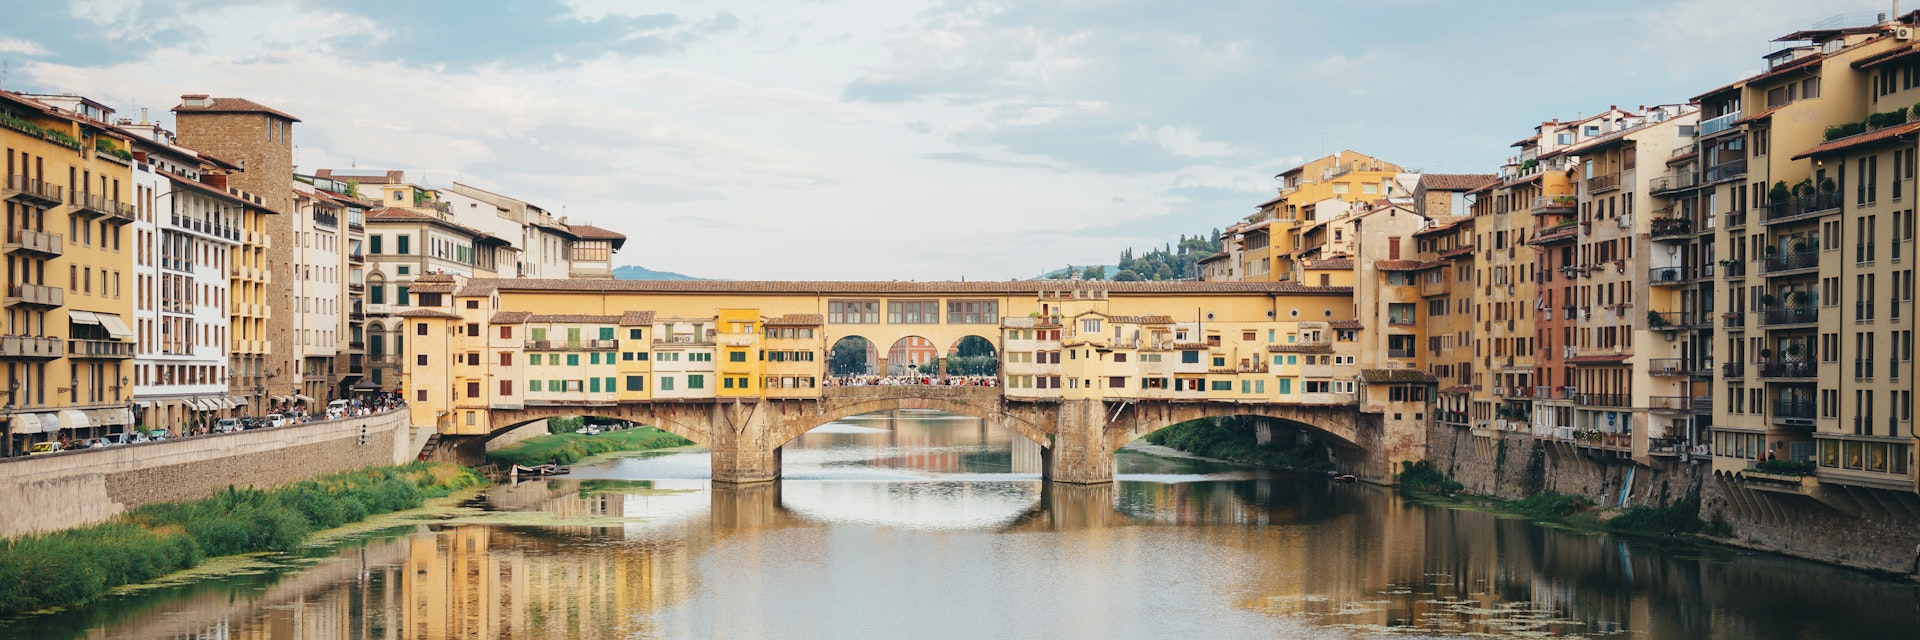 Italy, Florence, River Arno and Ponte Vecchio
591215507
Italy; Incidental People; Water; Water's Edge; Building; City; 2015; Architecture; Bridge - Built Structure; Built Structure; Mode of Transport; Cityscape; History; Travel Destinations; Bridge; Arno; Florence; Tourism; Tuscany; Nautical Vessel; Florence - Italy; Horizontal; Embankment; Ponte Vecchio; International Landmark; River; Day; Riverside; Photography; Cloud - Sky; Sky; Famous Place; Travel; Outdoors; Color Image; City Break;